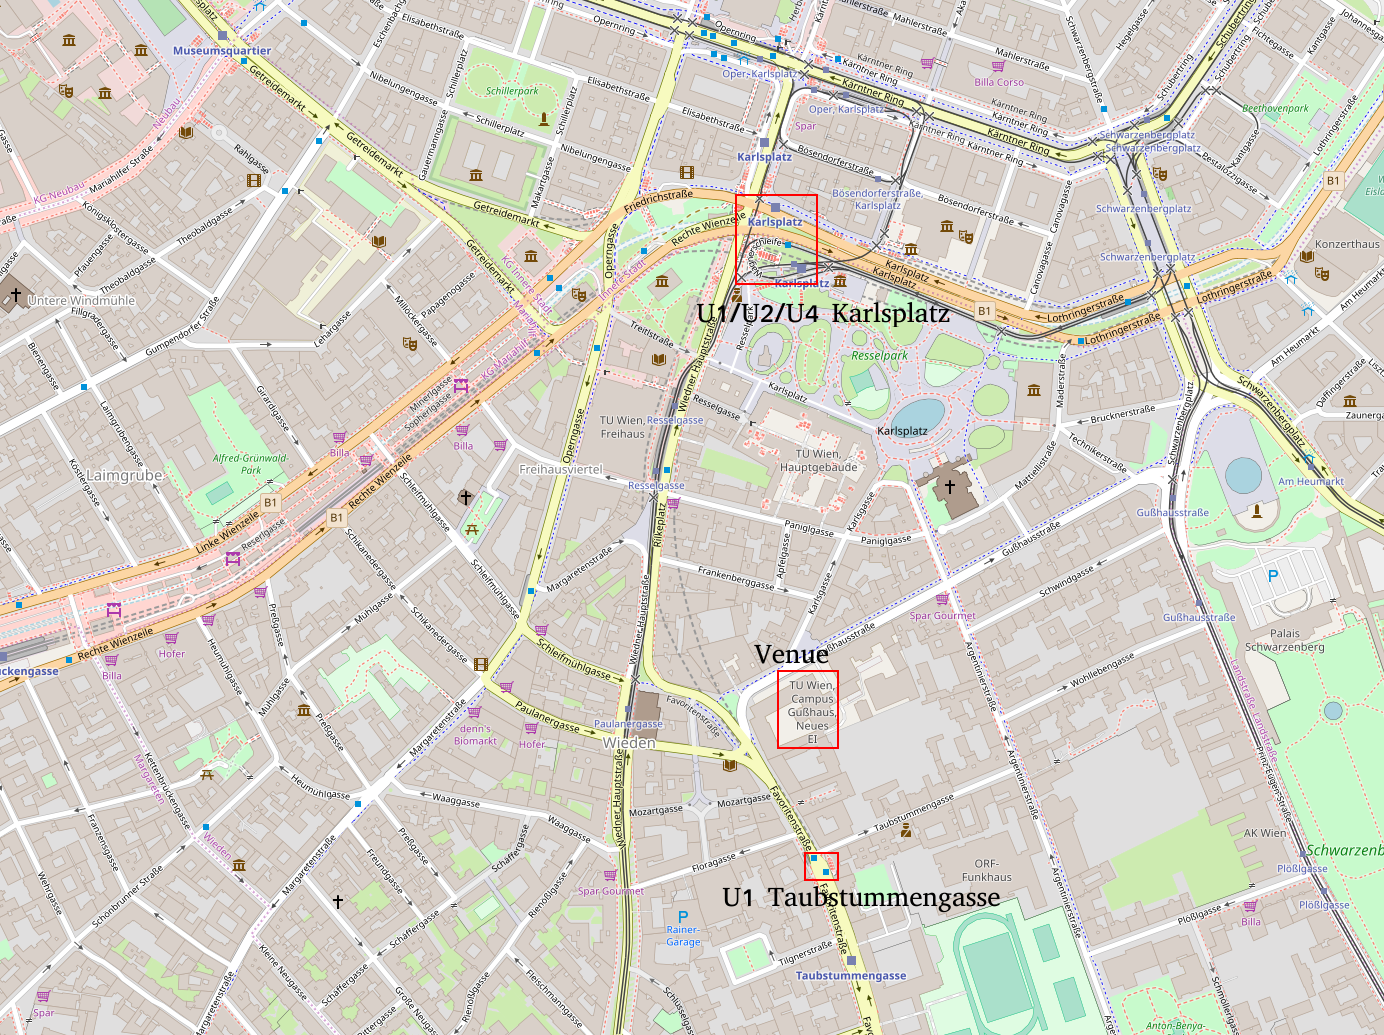 Image of map with venue and nearest subway stations